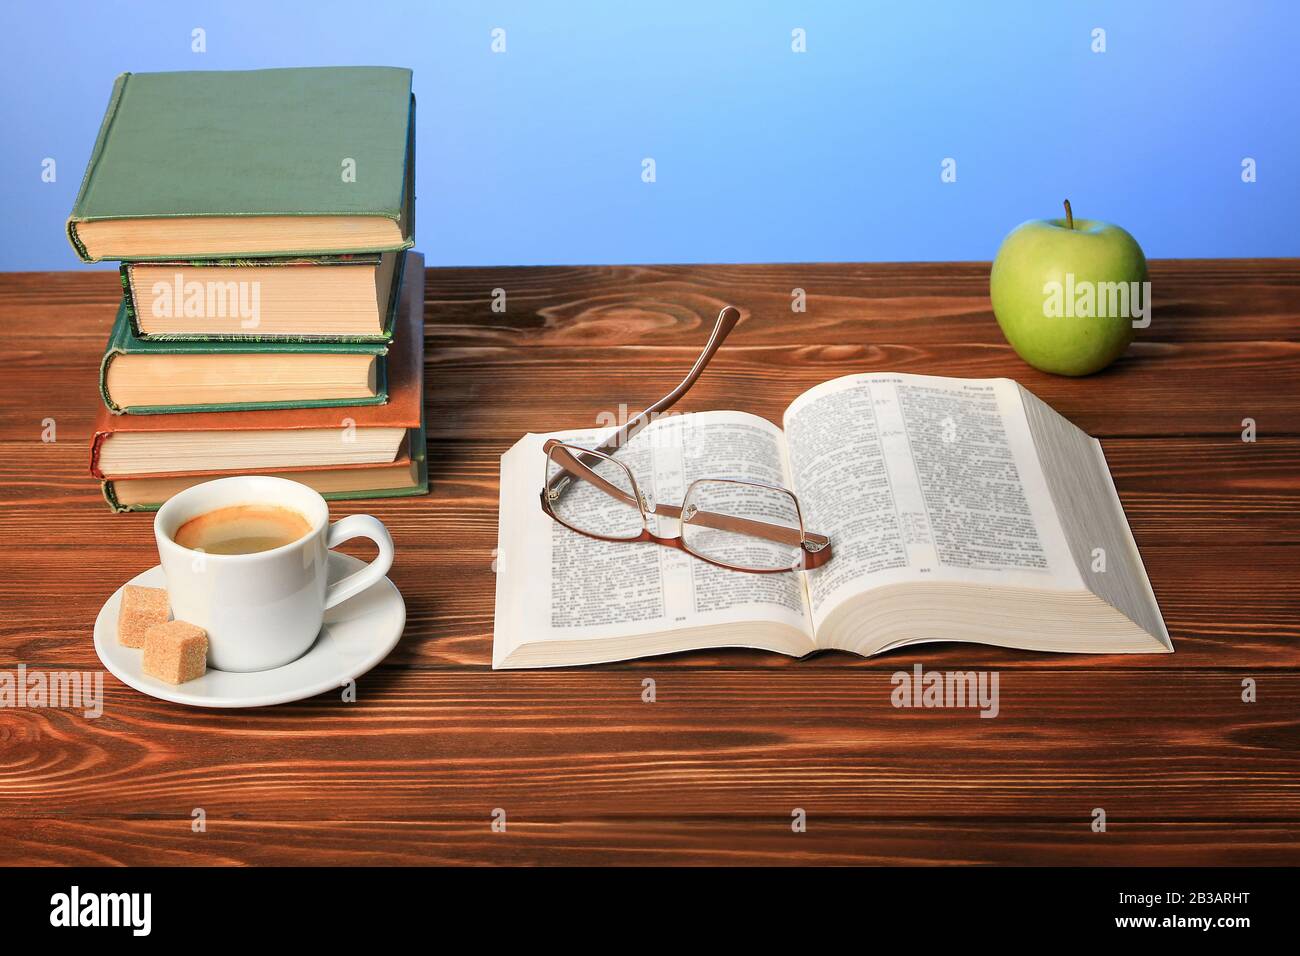 An open book on the table, a green apple, glasses, a cup of cappuccino coffee with sugar cubes, blue background. Stock Photo